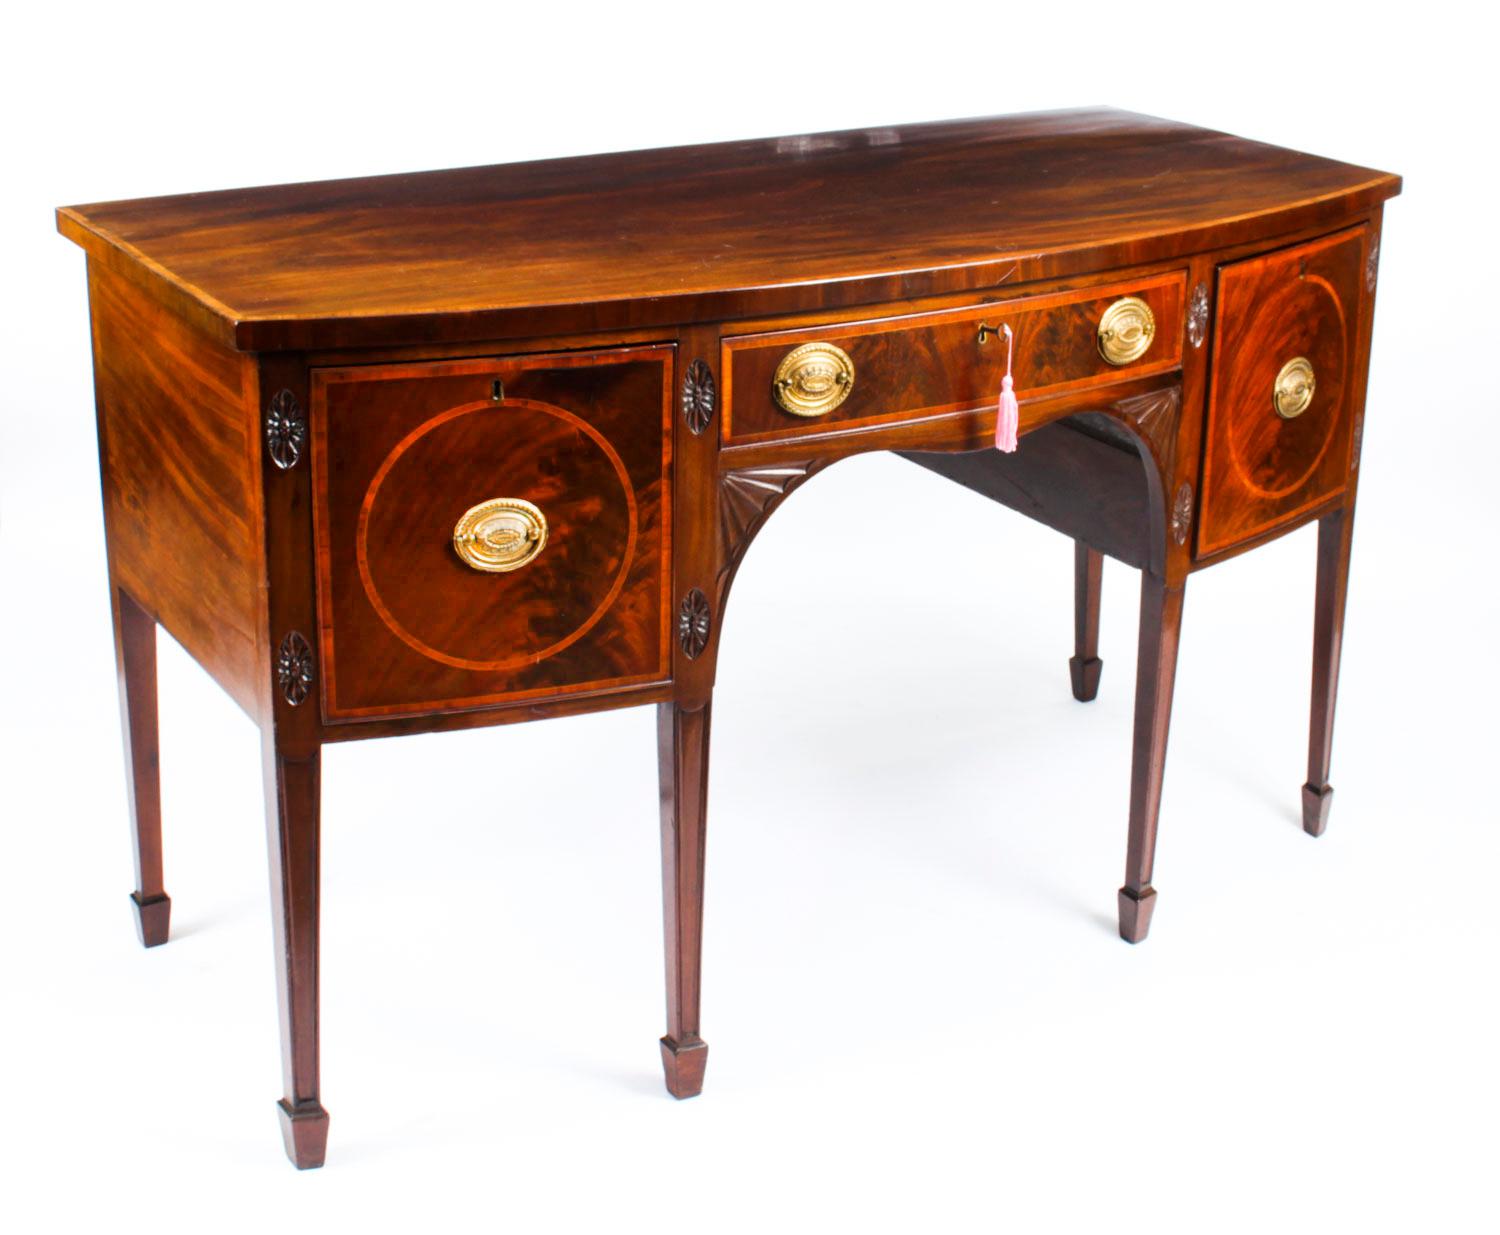 Antique George III Inlaid Flame Mahogany Sideboard, 18th Century For Sale 14